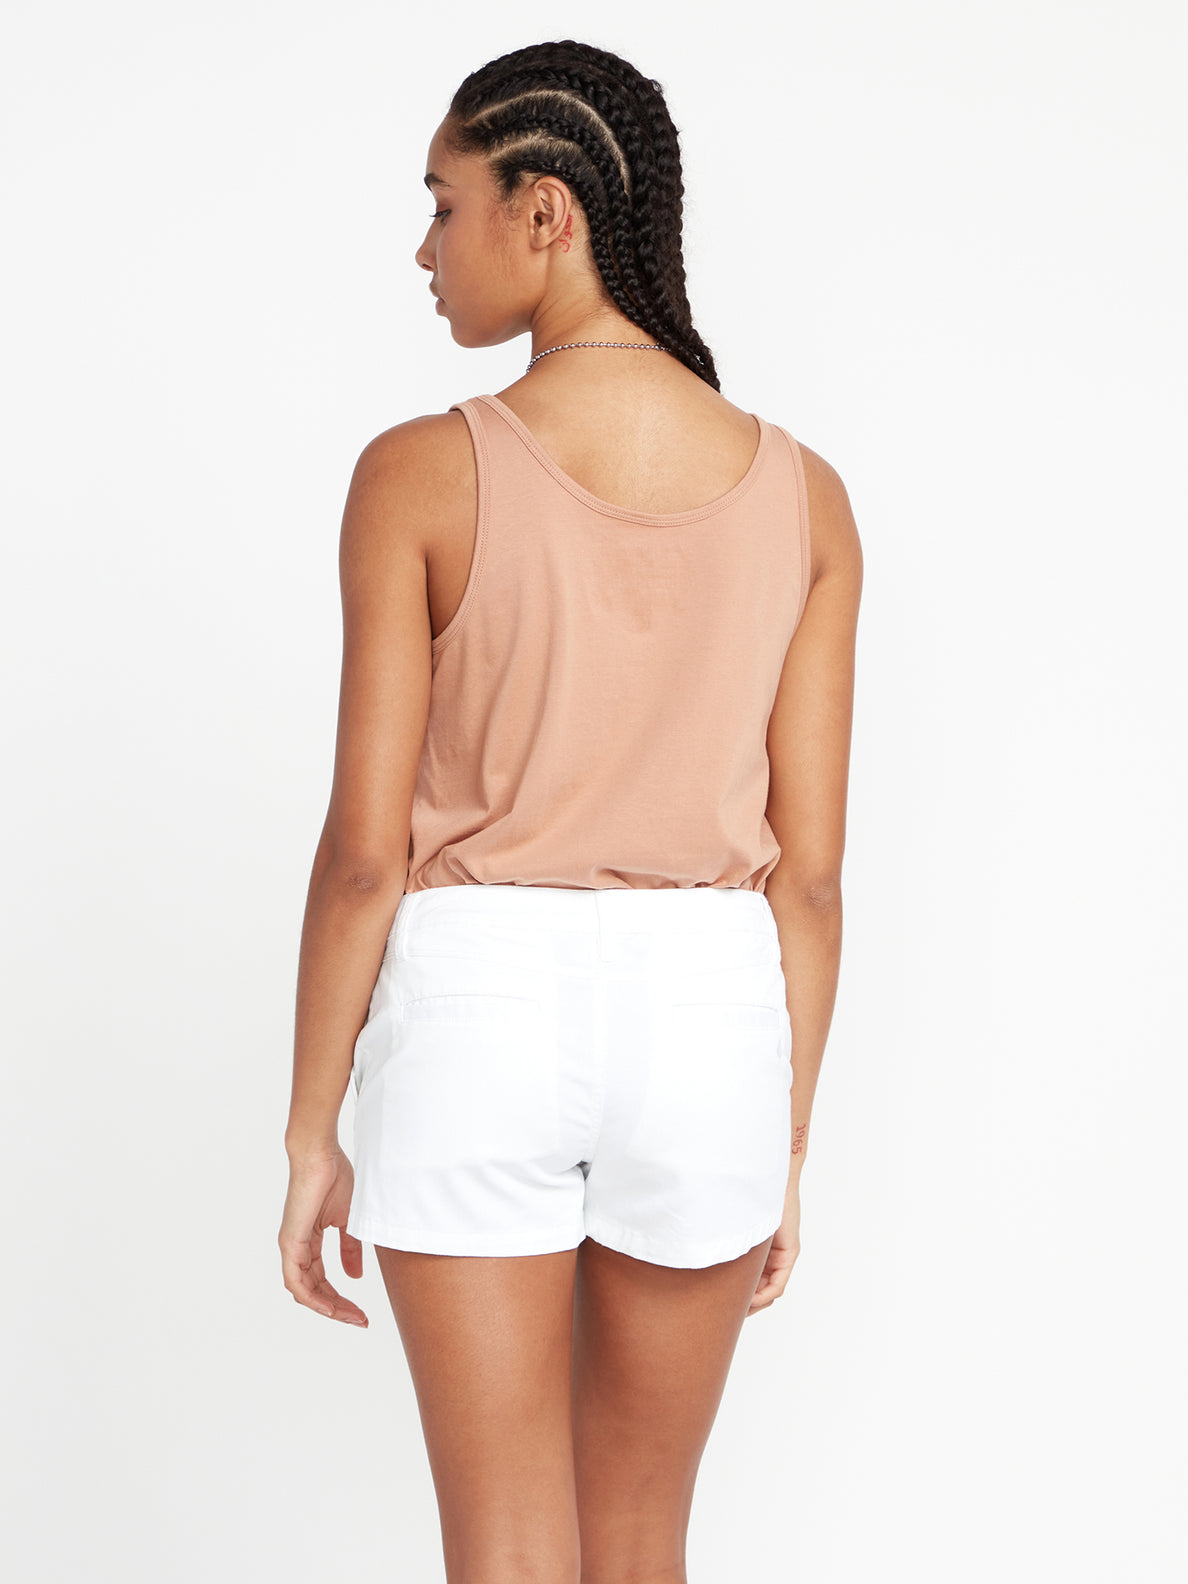 Frochickie Shorts - White